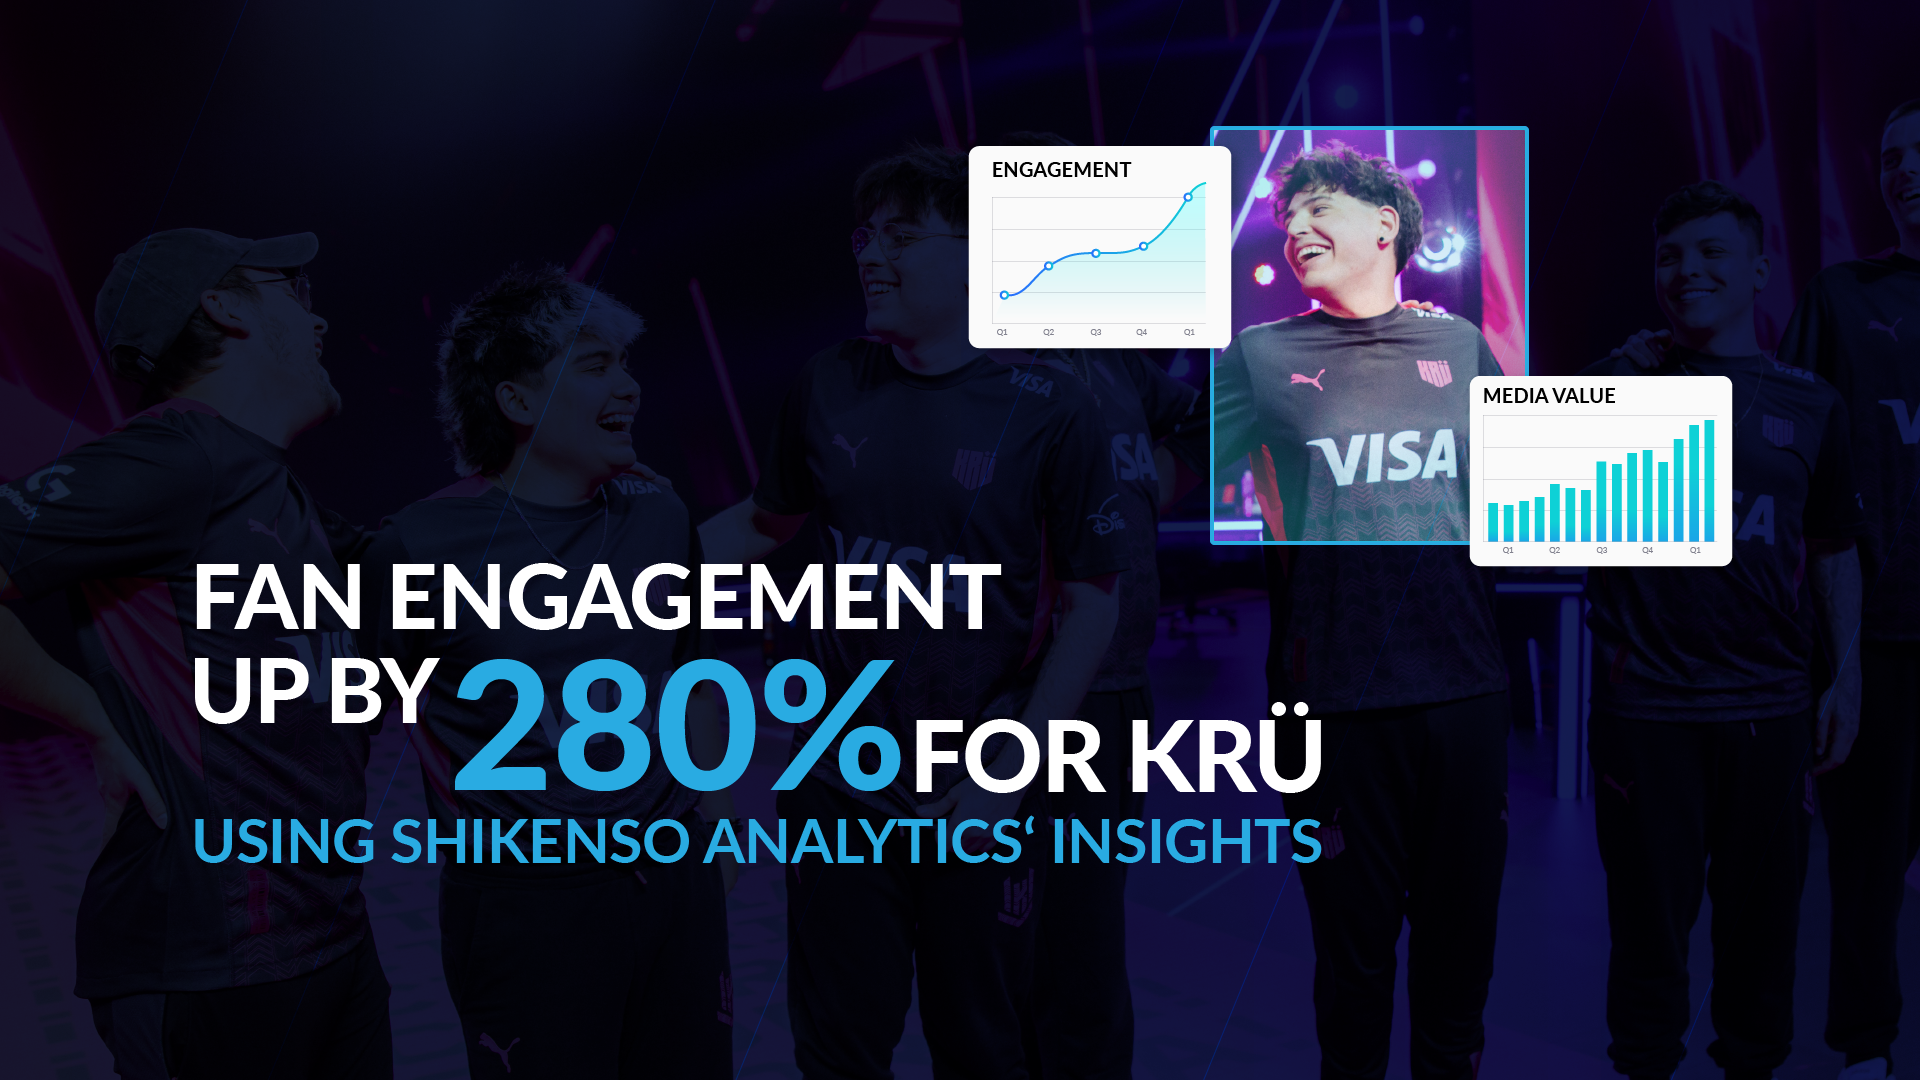 KRÜ Esports boosts fan engagement by 280% and media value by 231% by leveraging Shikenso Analytics' comprehensive sponsorship AI solutions.